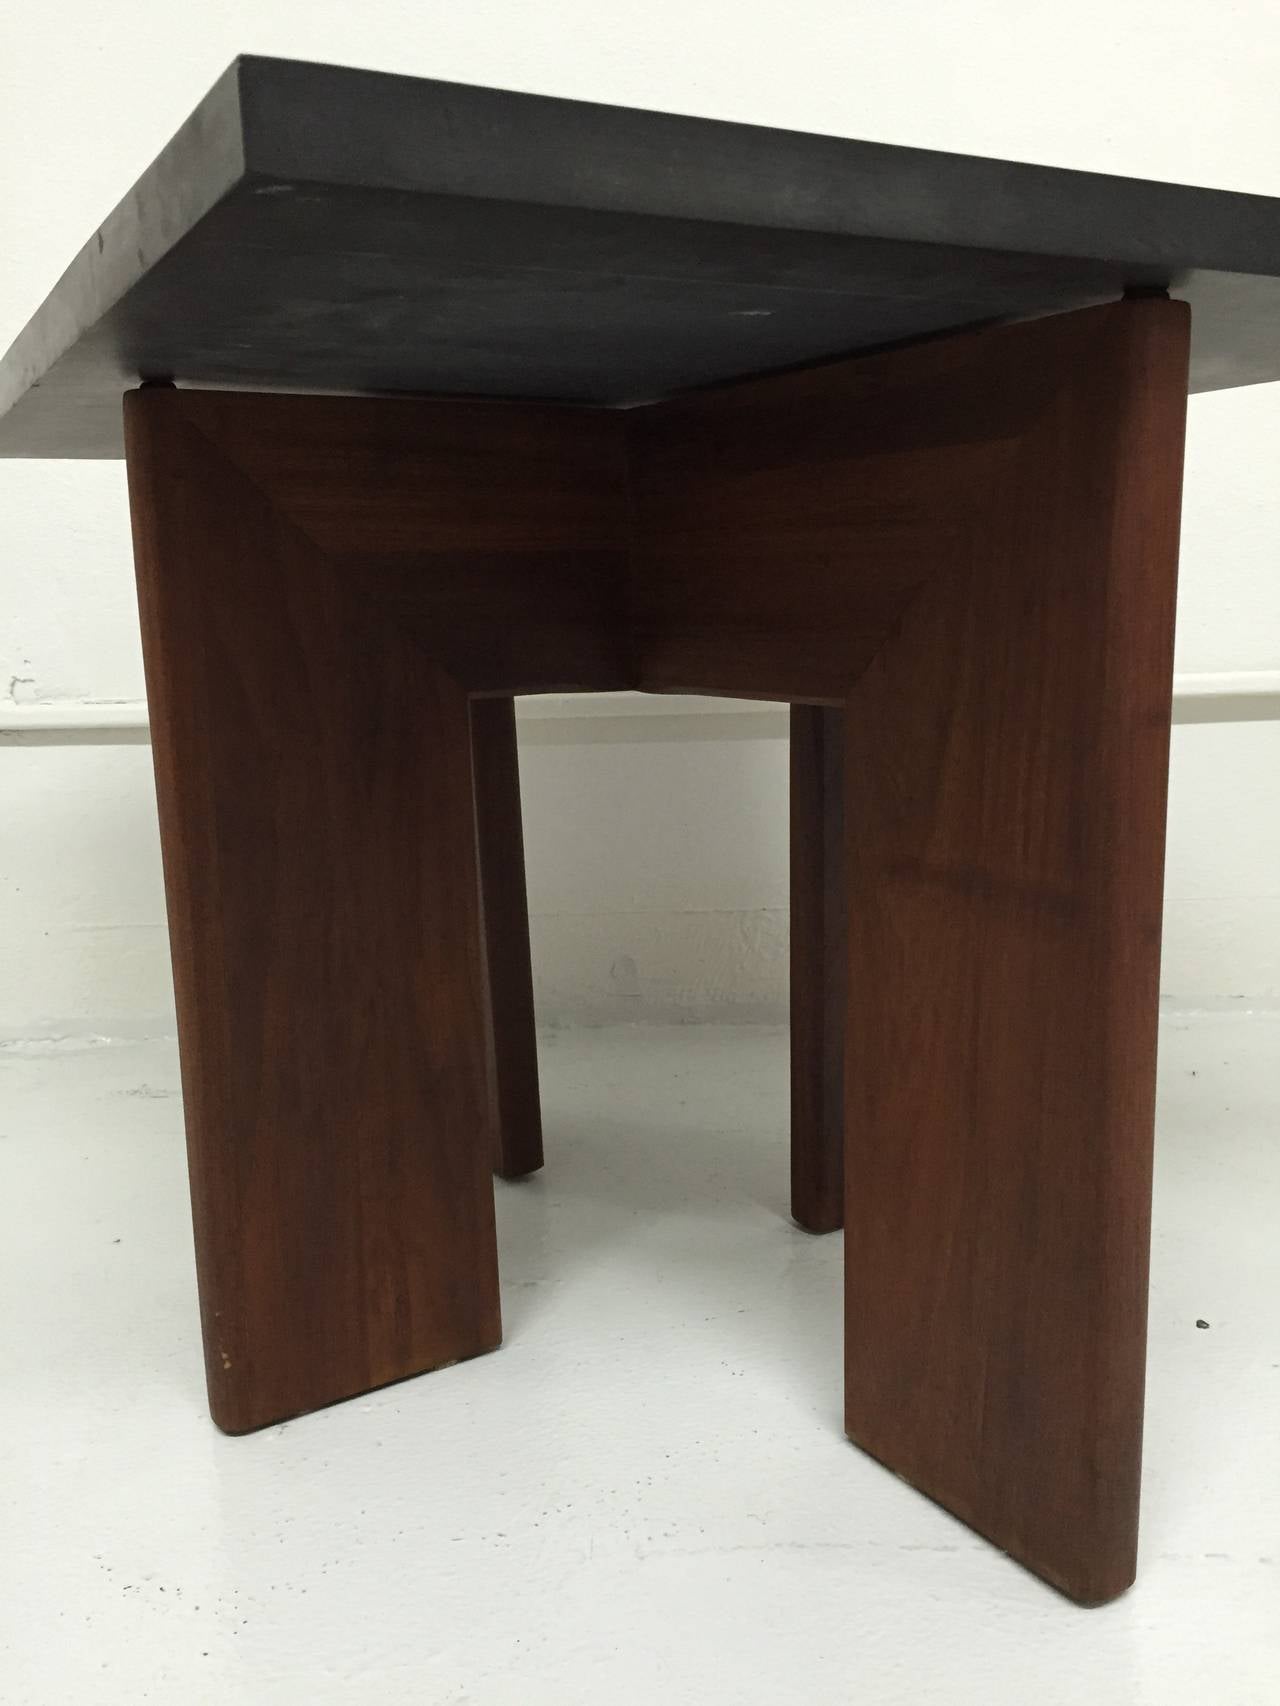 20th Century Pair of Adrian Pearsall Side Tables for Craft Associates